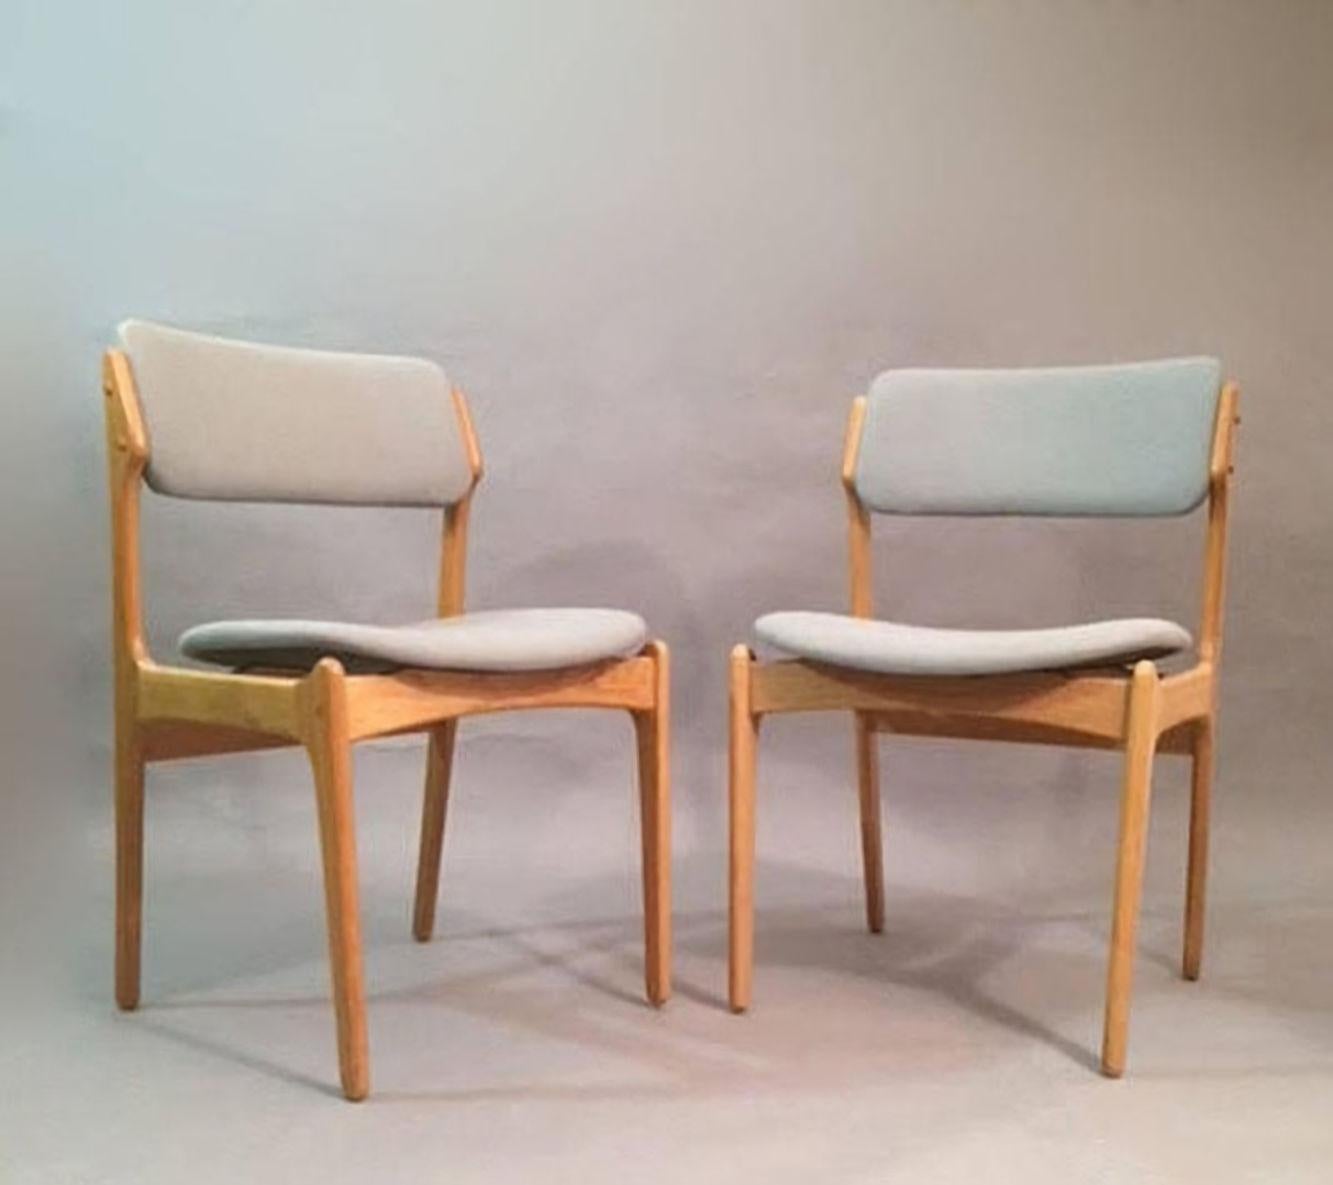 Fully restored Danish dining chairs inc. reupholstery designed by Erik Buch in 1949.

The chairs have a simple solid construction with elegant lines and a comfortable seating experience on the floating seat design that is becoming increasingly